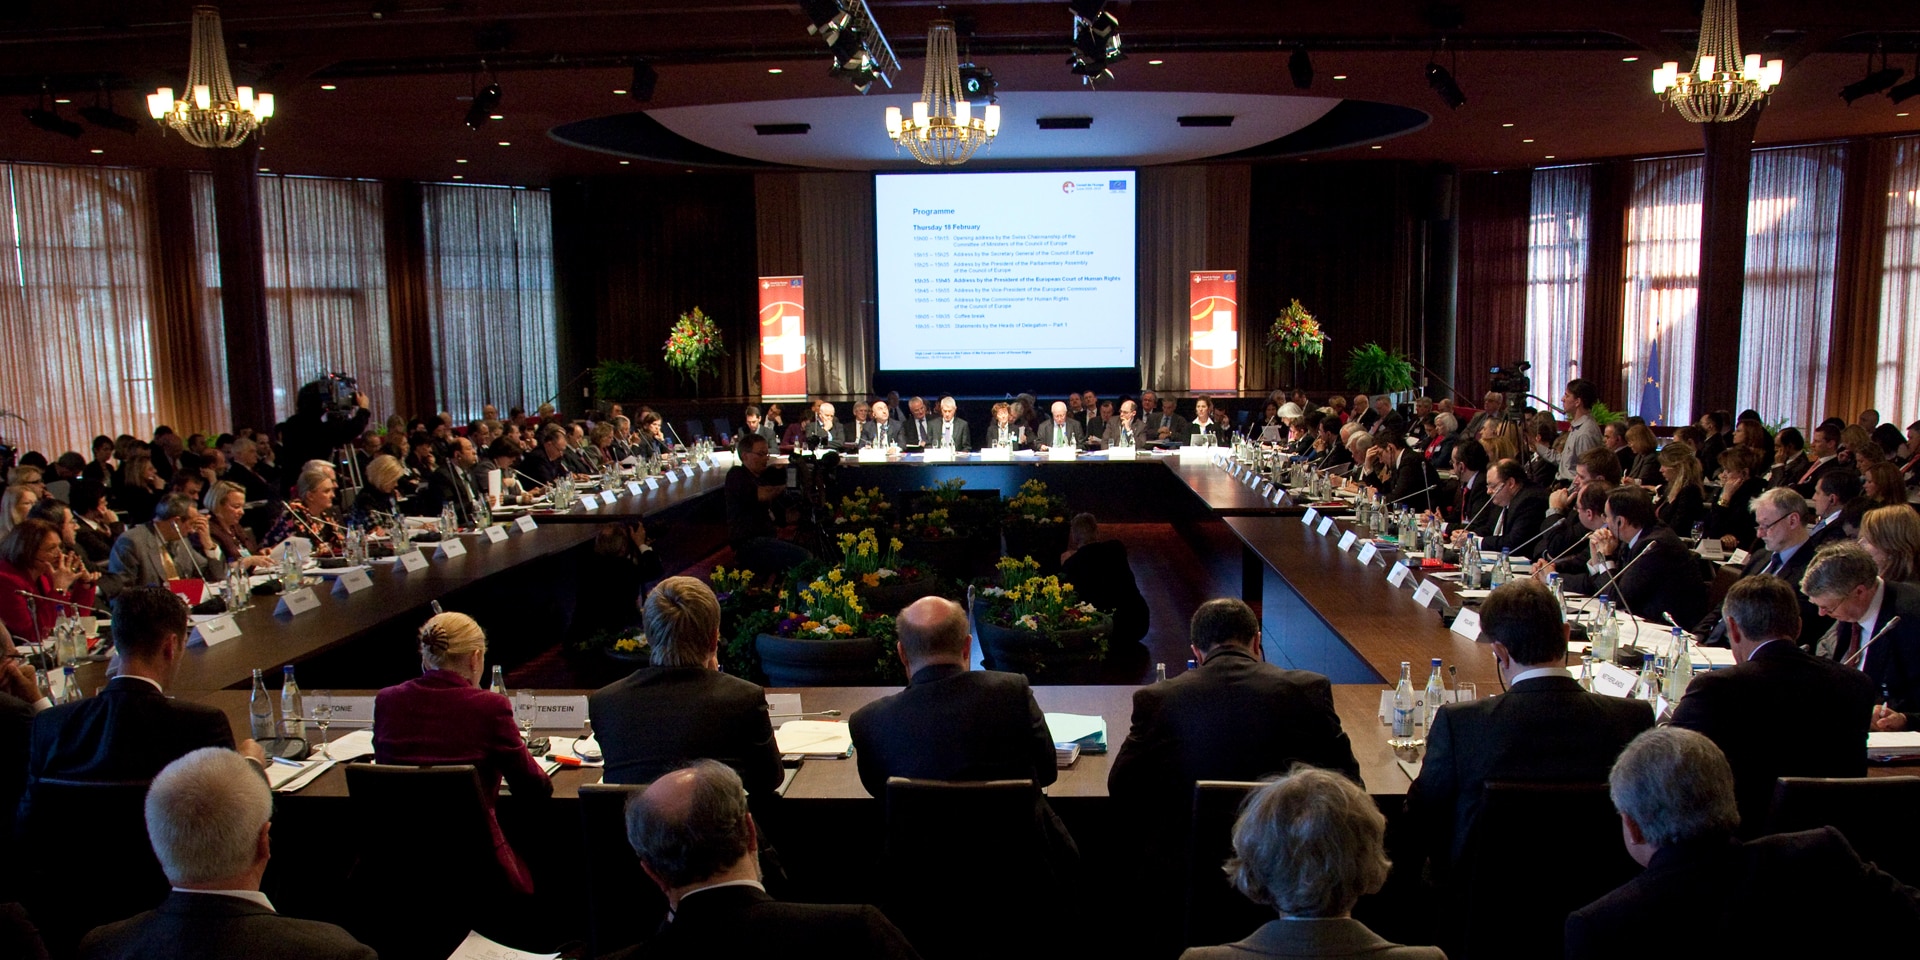 The photo was taken at the Council of Europe Ministerial Conference in February 2010 in Interlaken: it shows a room full to bursting with participants.